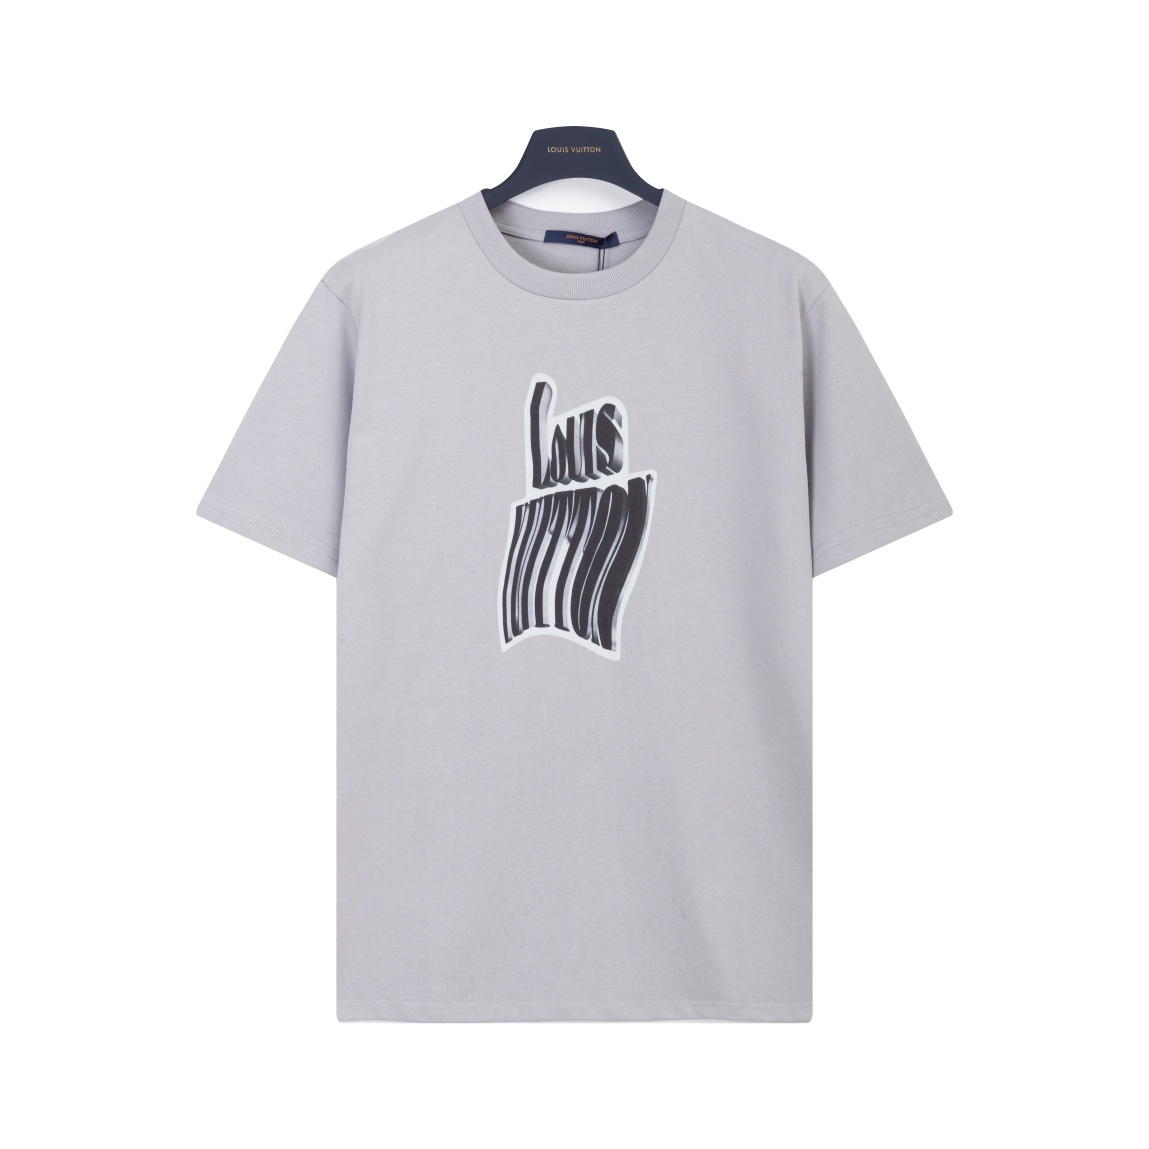 Louis Vuitton Clothing T-Shirt Grey Printing Unisex Cotton Spring/Summer Collection Short Sleeve